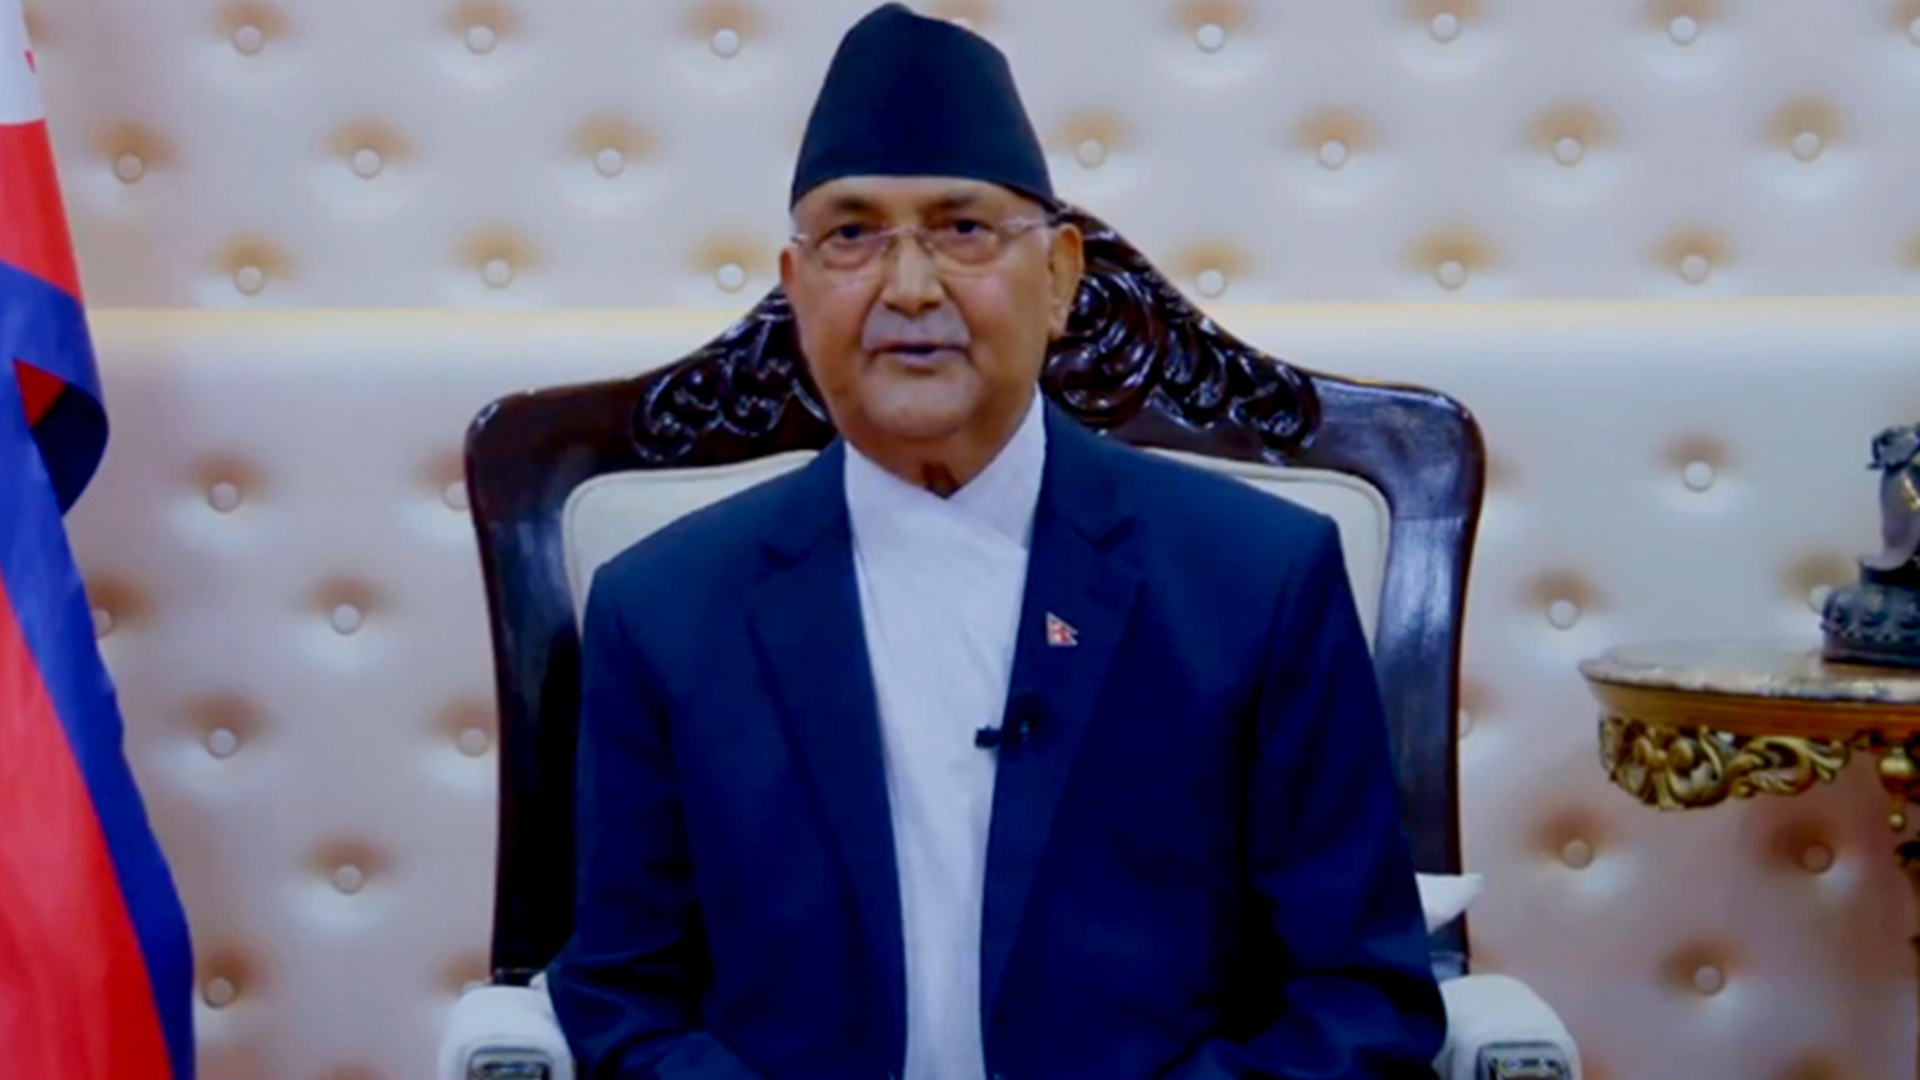 Entire focus of government on the development of the country: Prime Minister Oli